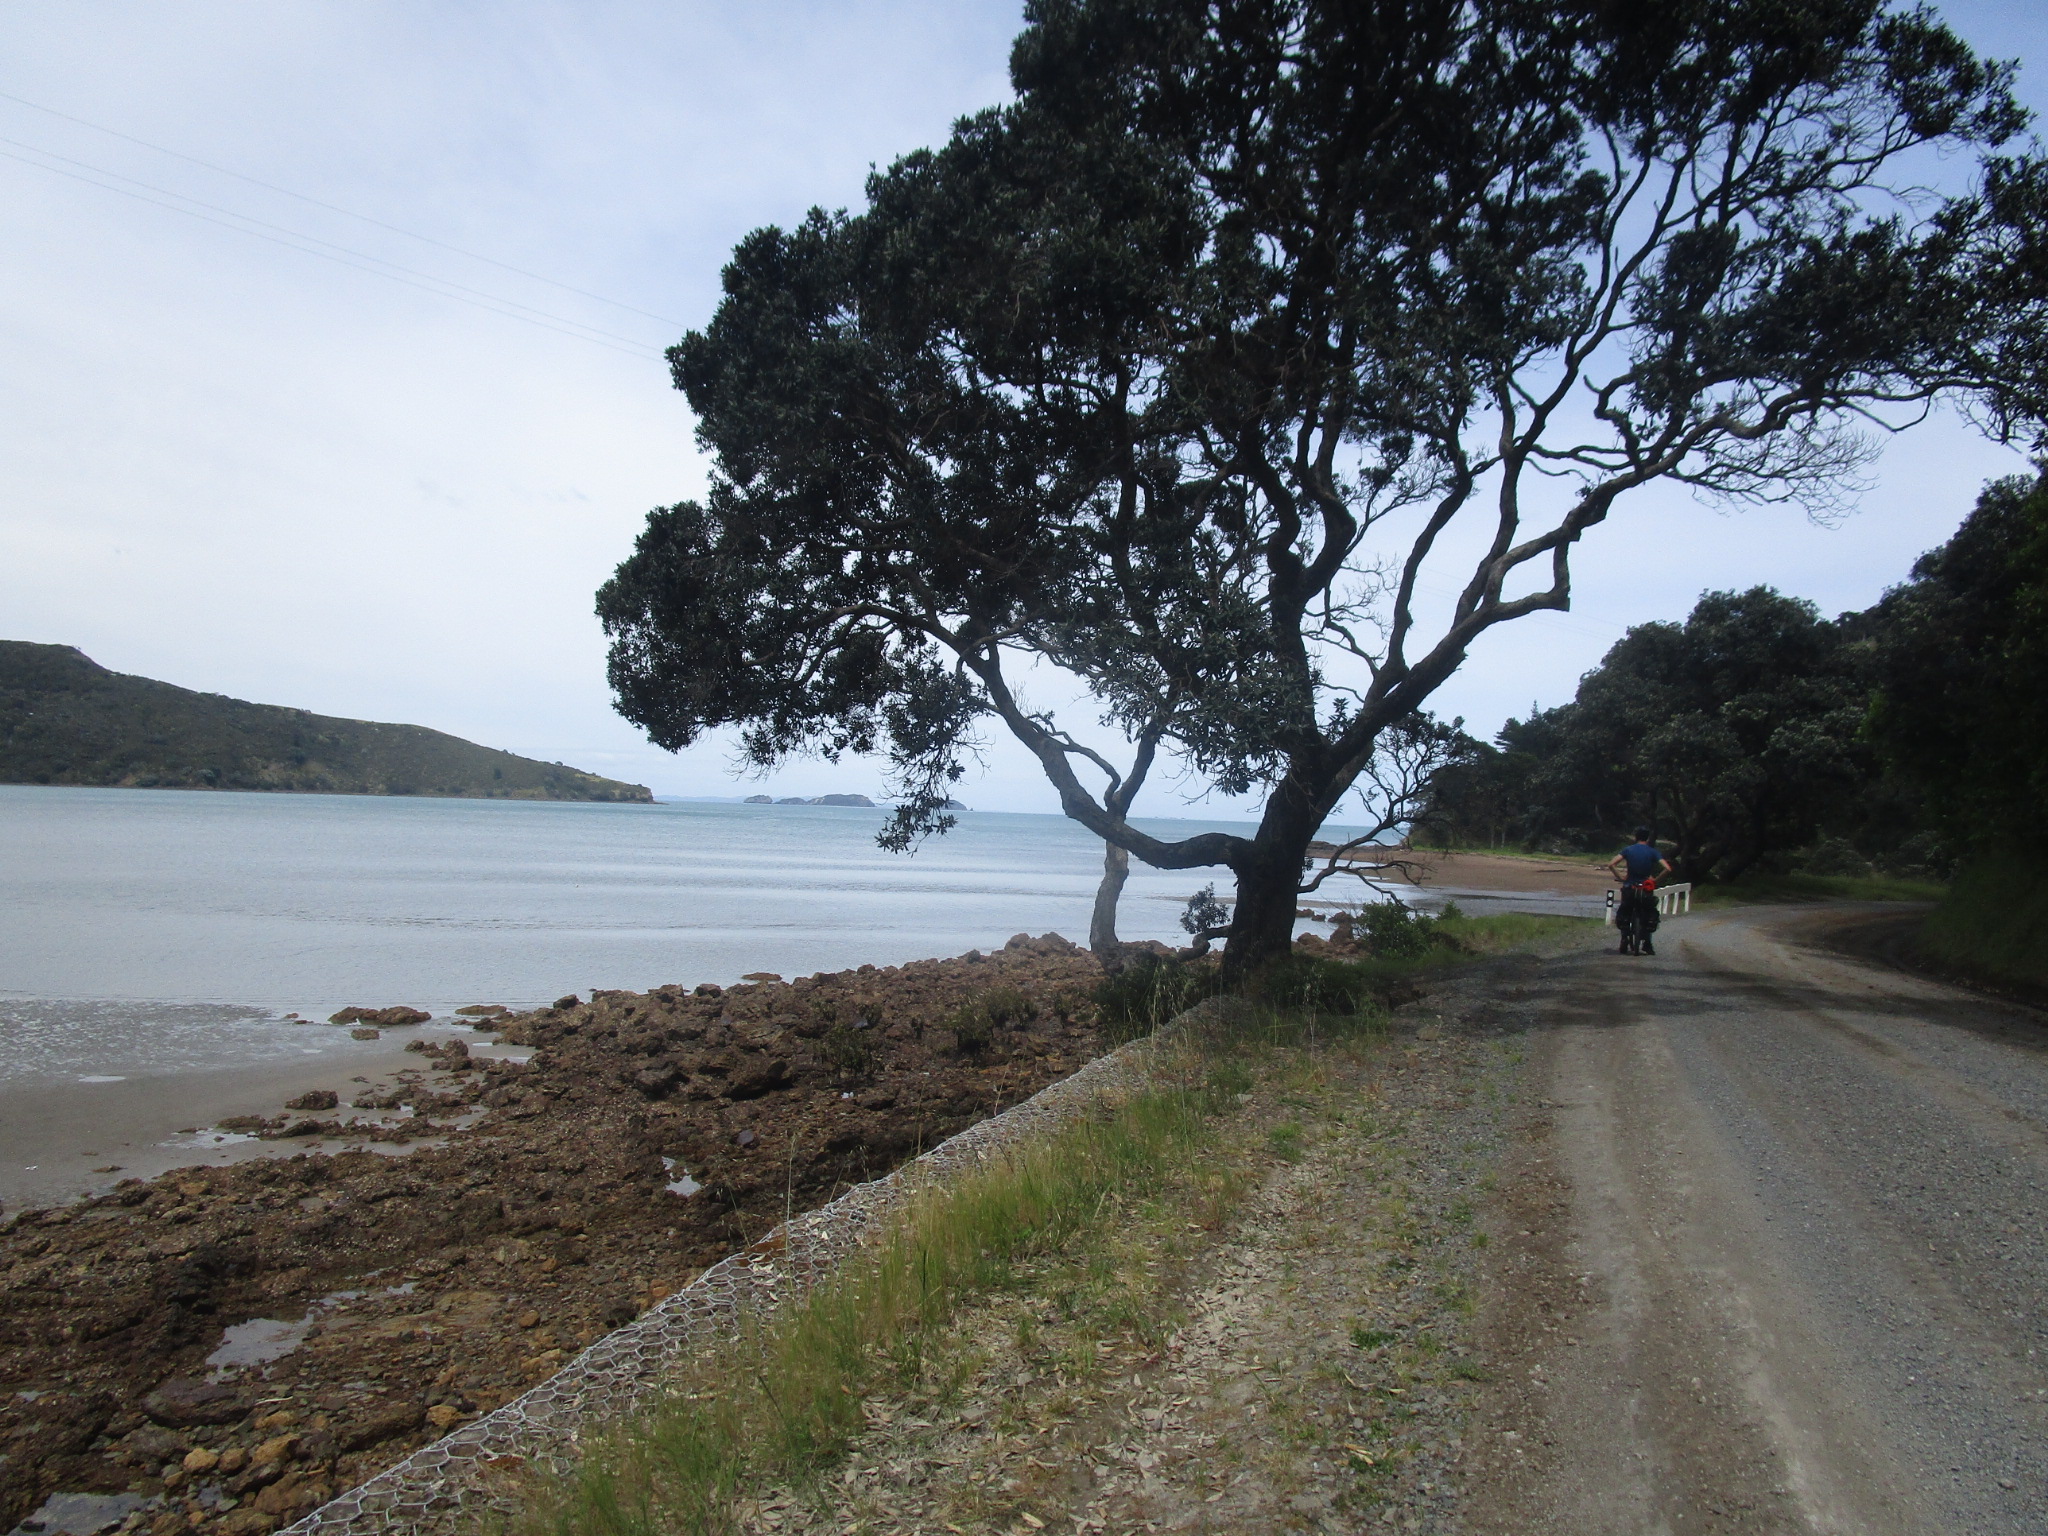 Touring the Coromandel on a bicycle